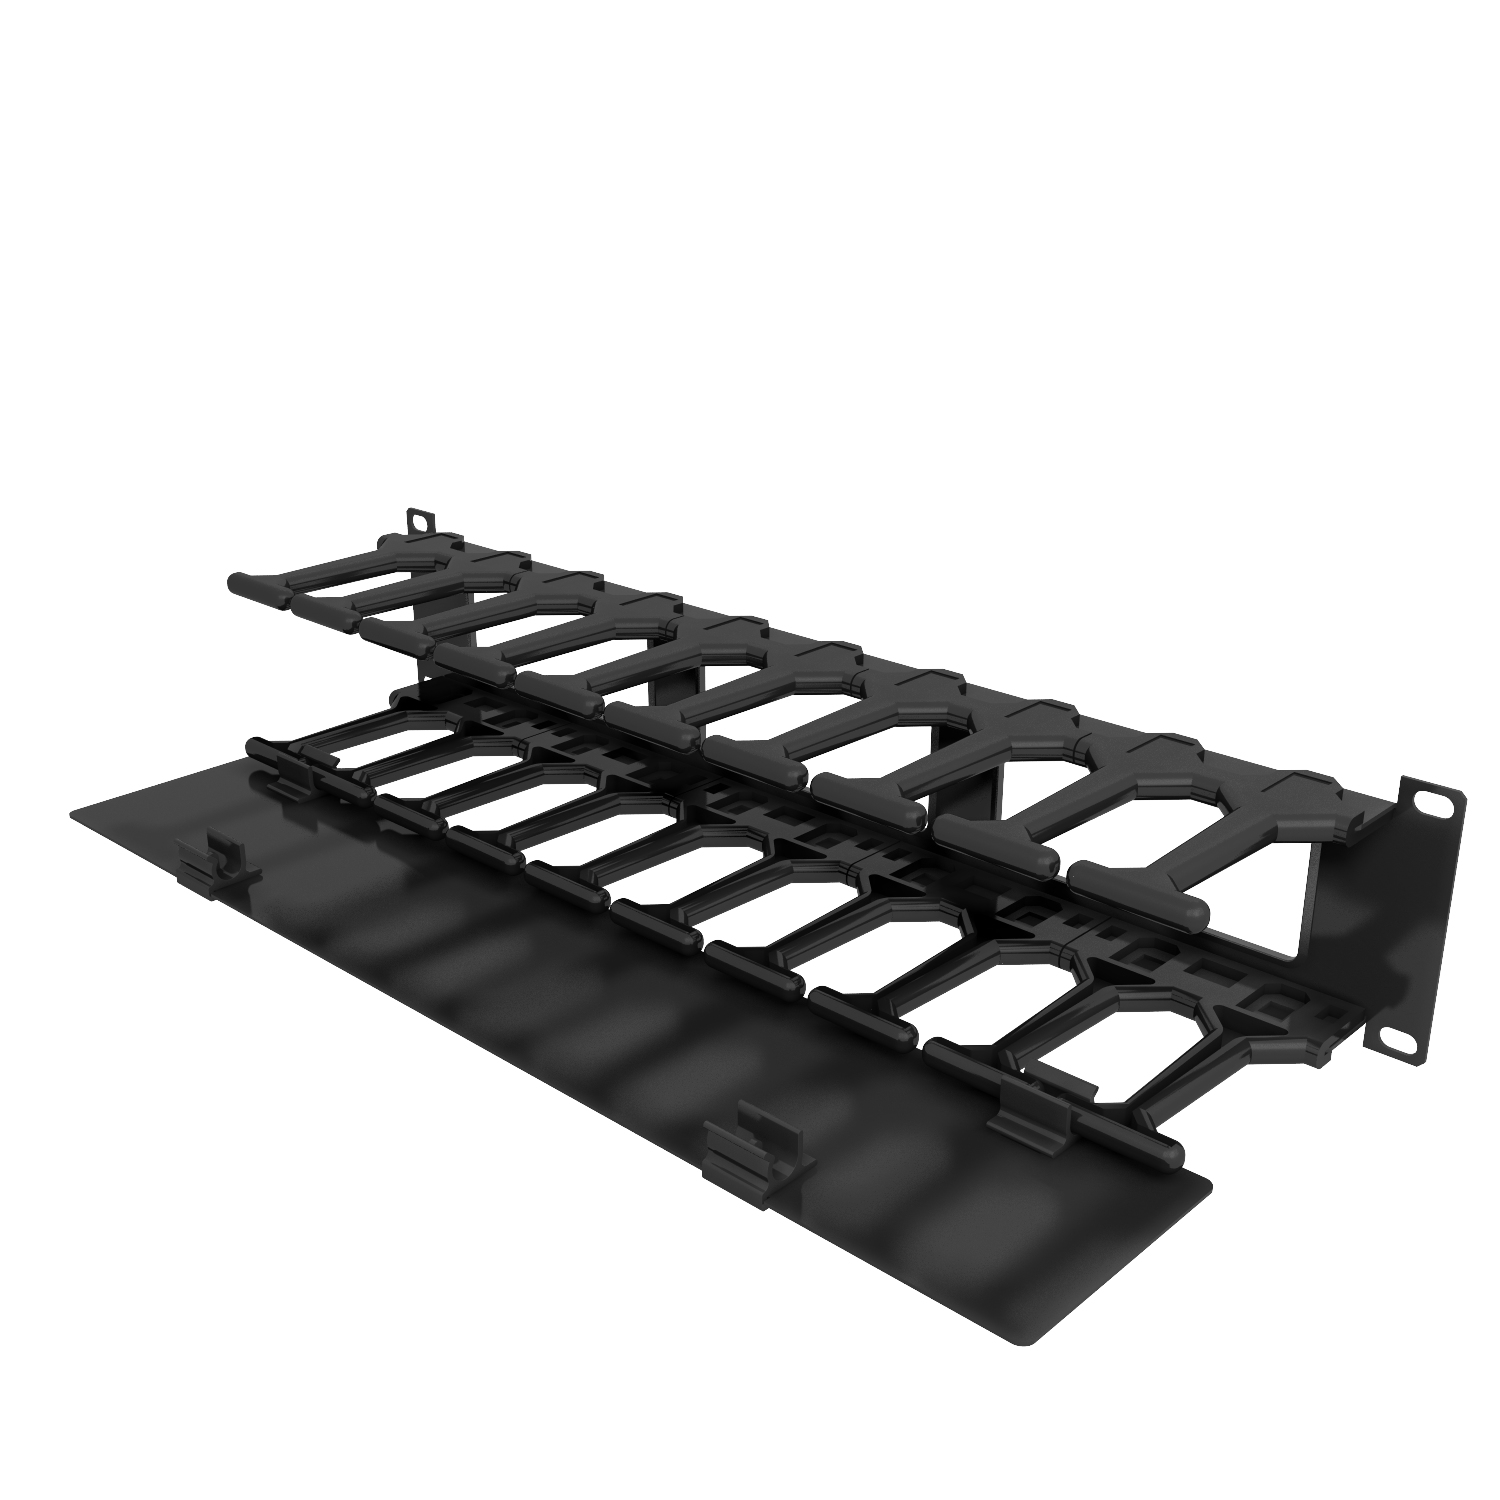 Vertiv VRA1003 2U x 4in Deep Horizontal Cable Manager